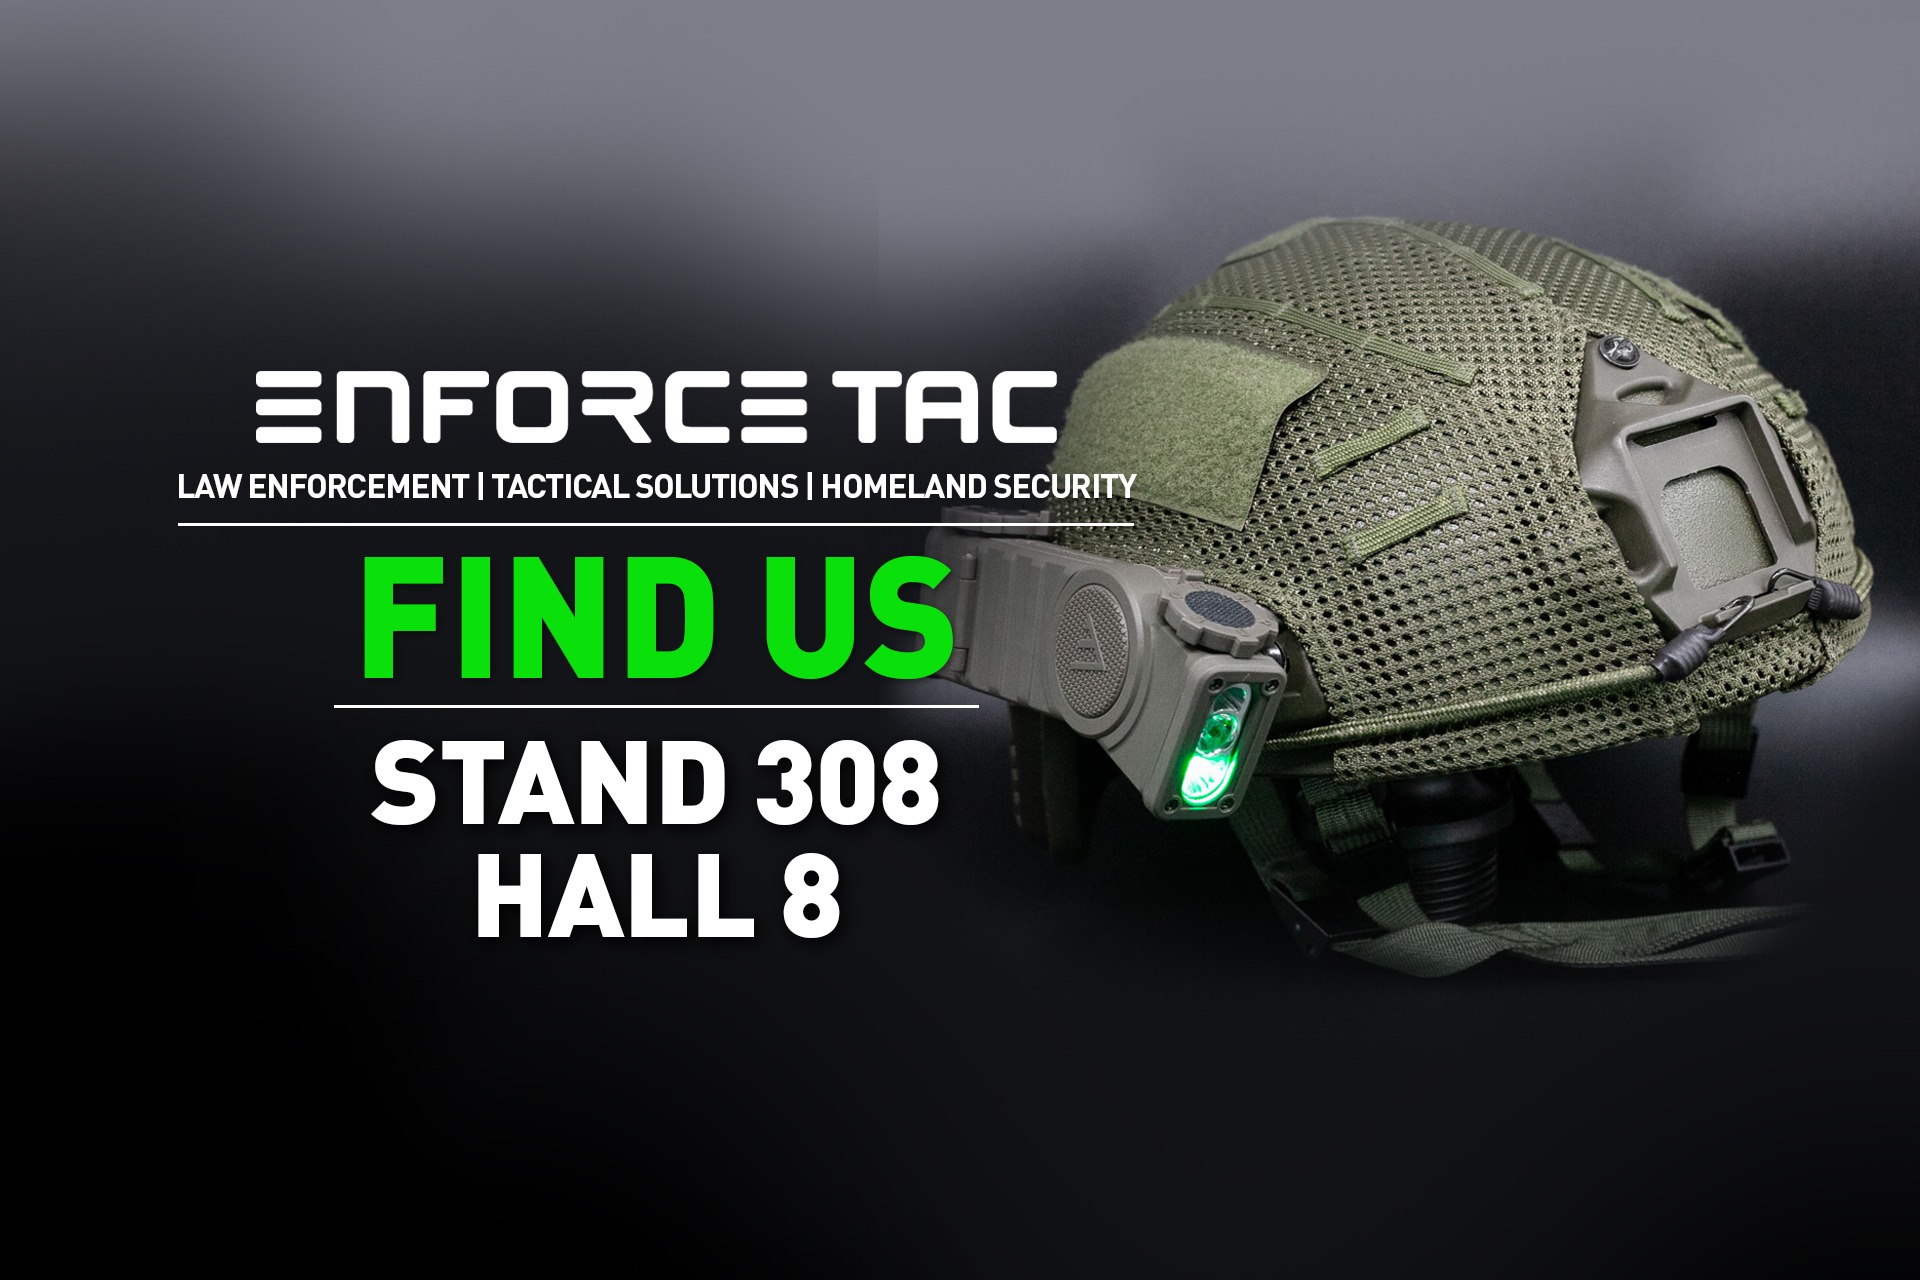 You are cordially invited to visit our booth at the Enforce Tac Show